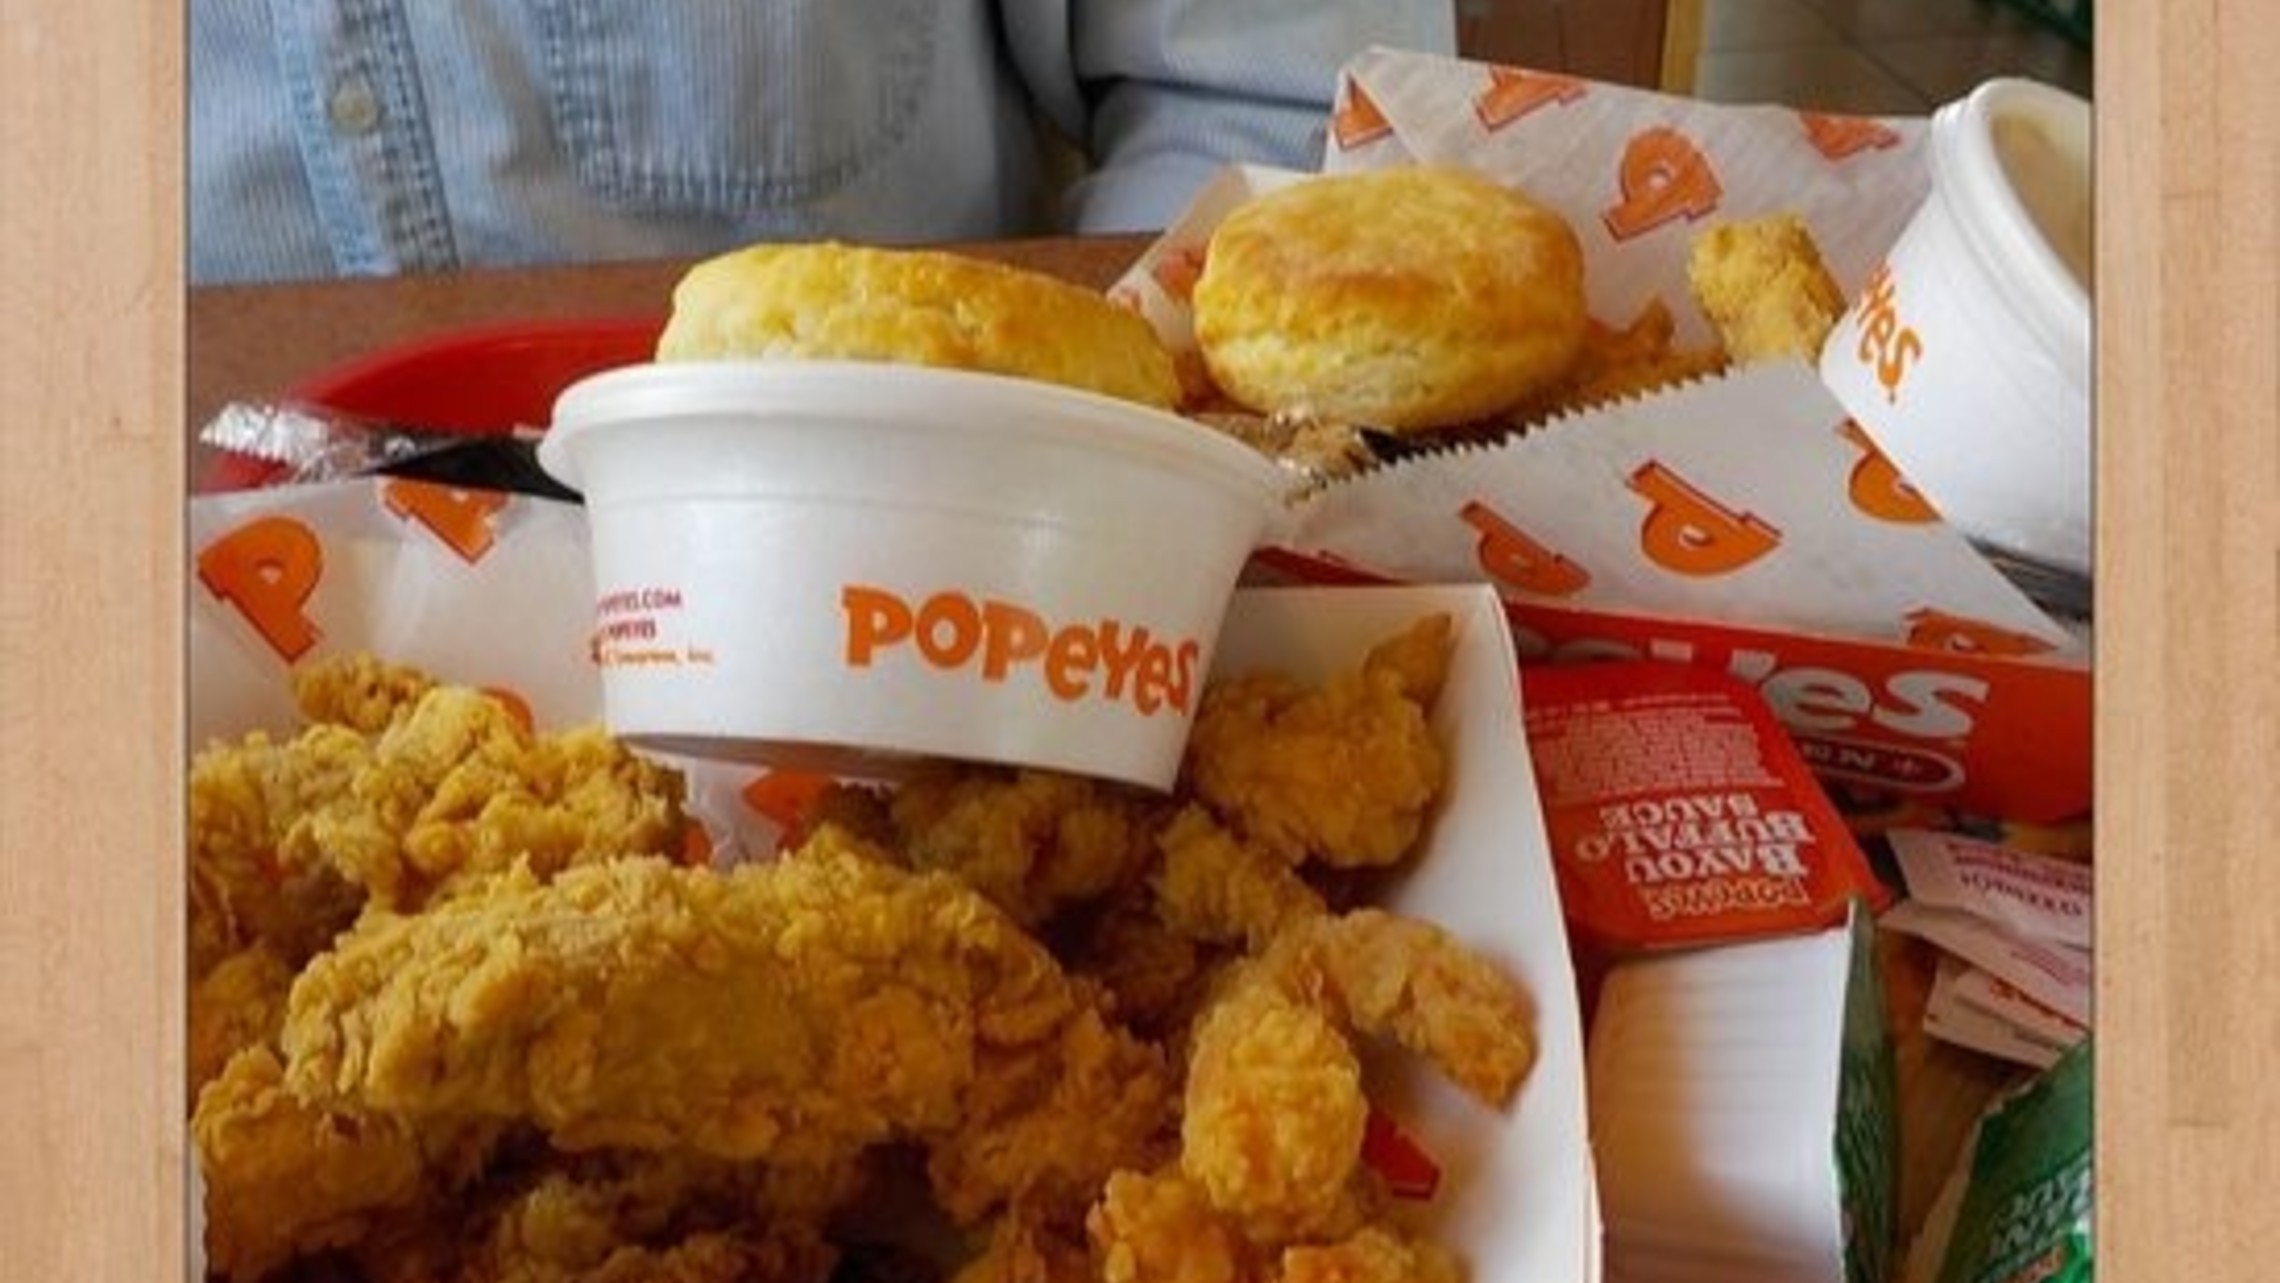 Picture of Popeye's meal